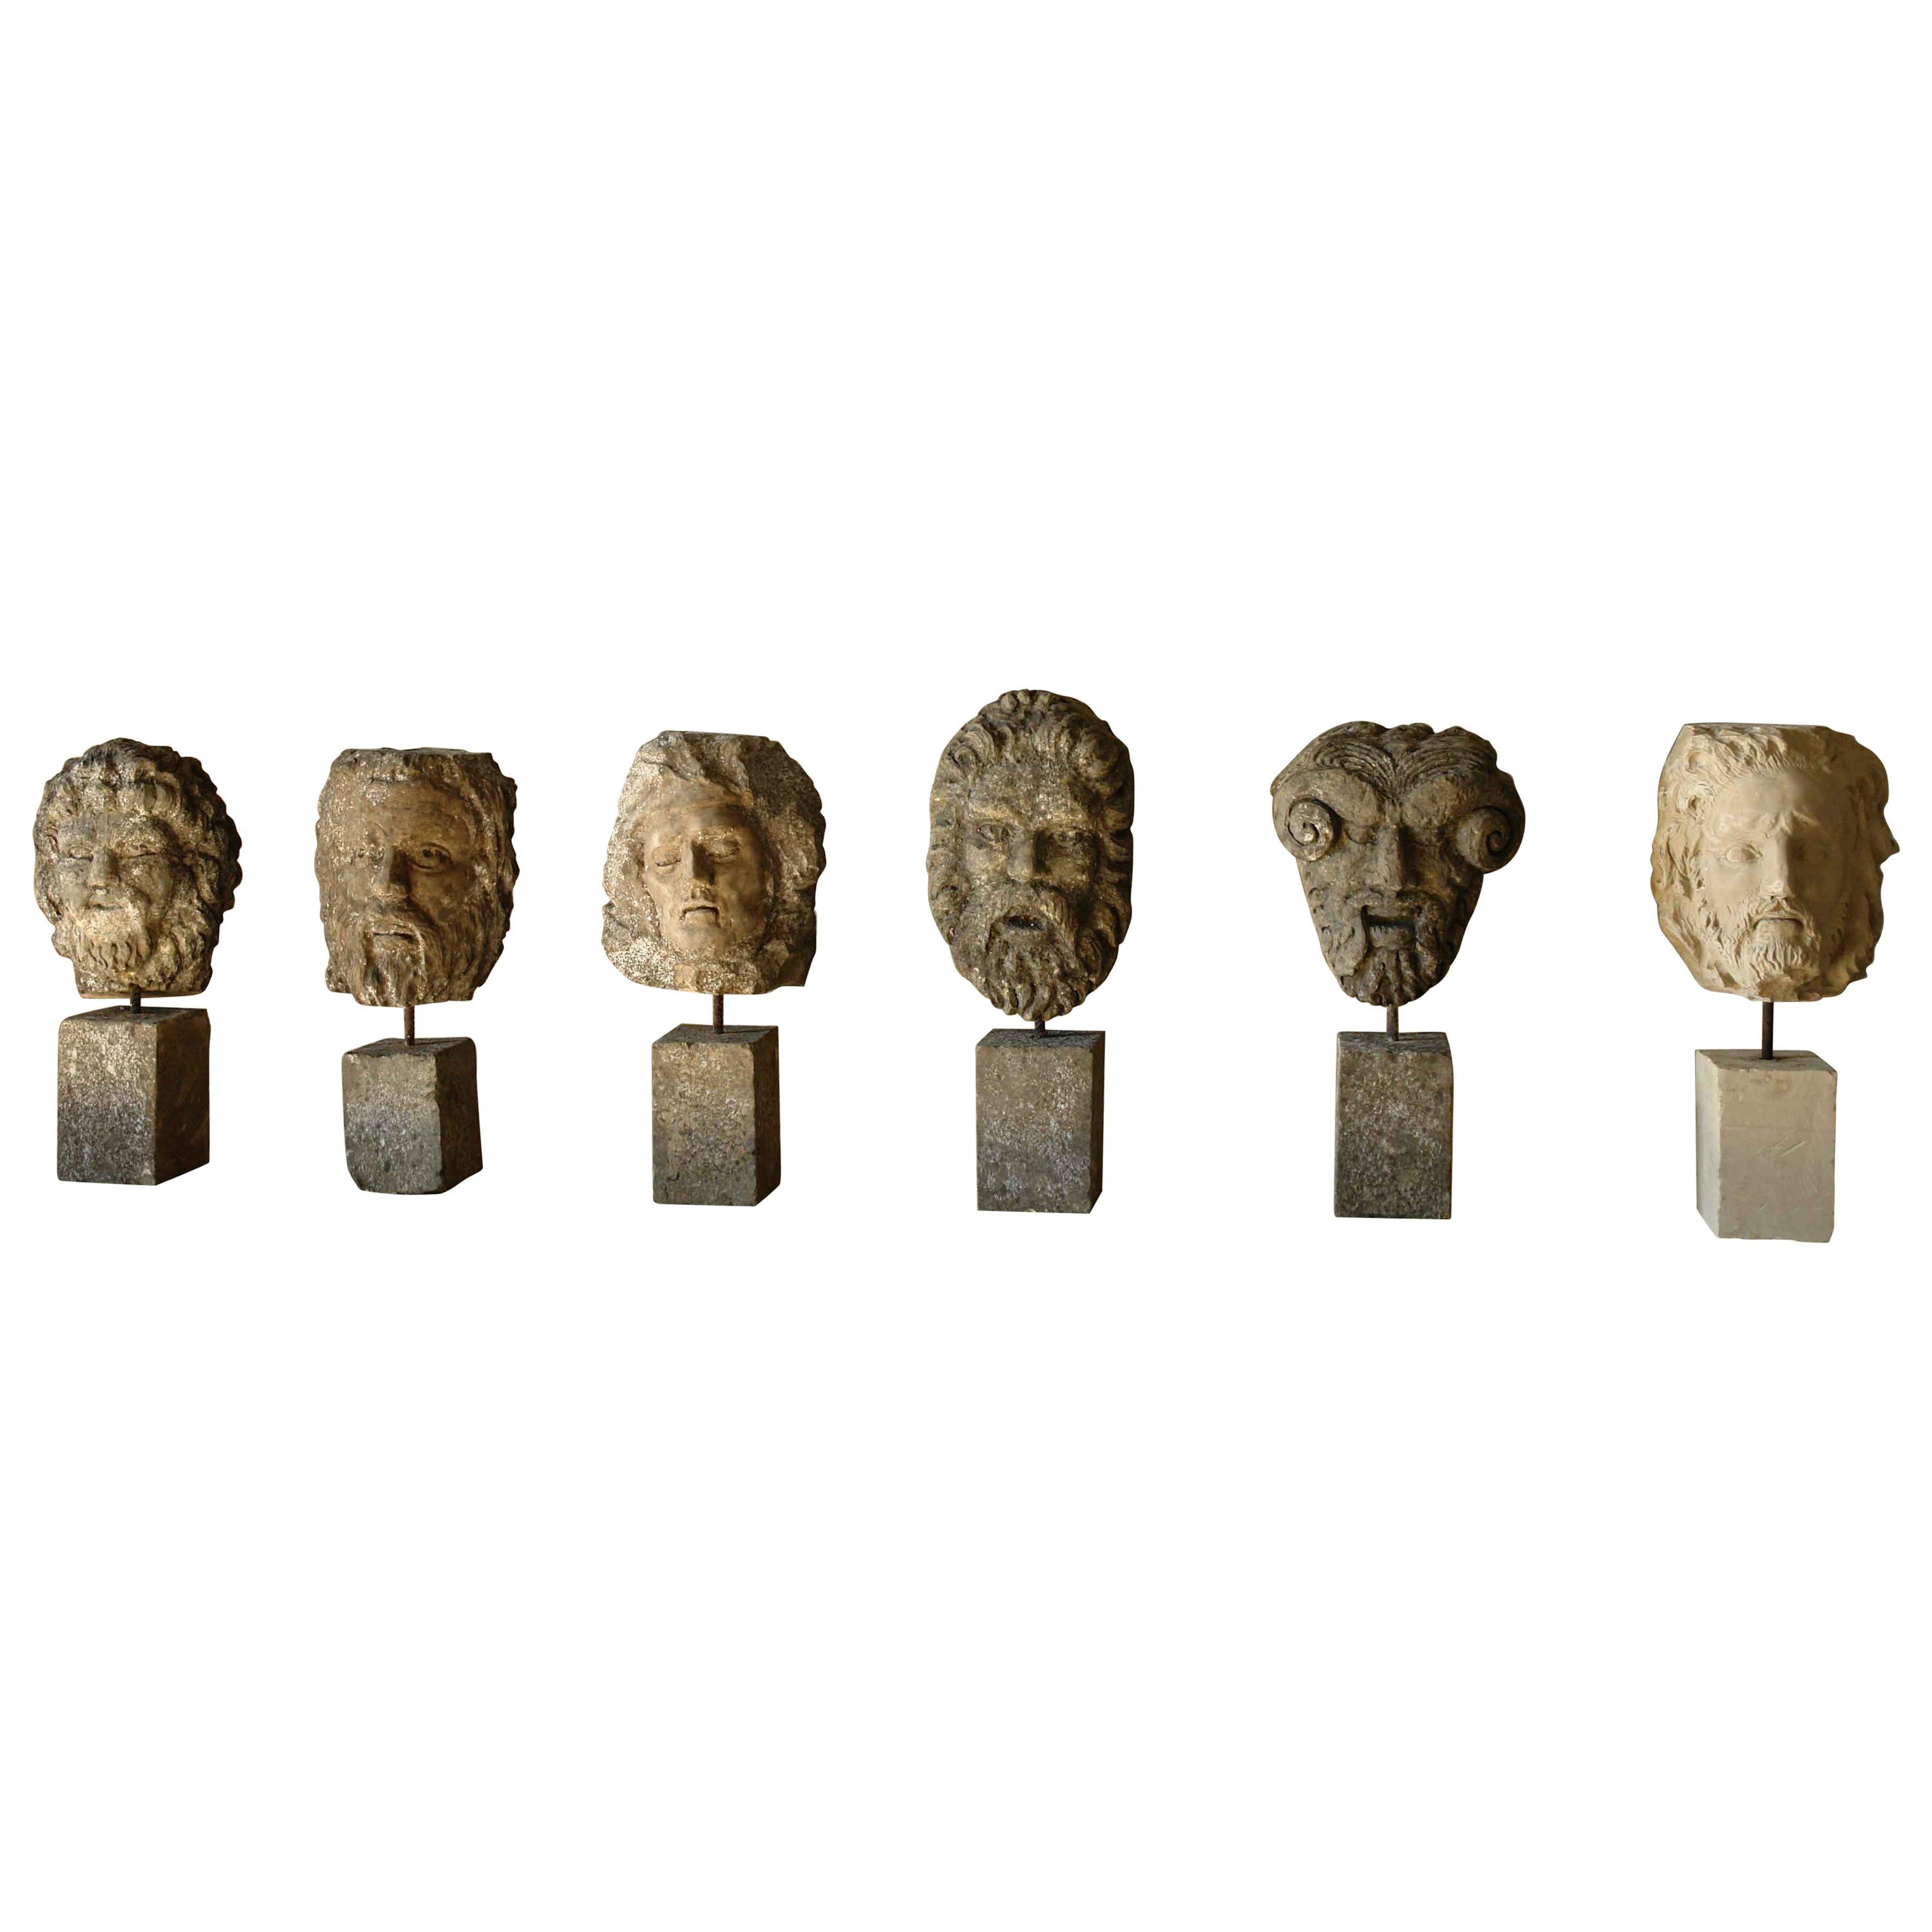 Collection of 6 Gods Head Statues Hand-Carved in Limestone, Late 20th Century For Sale